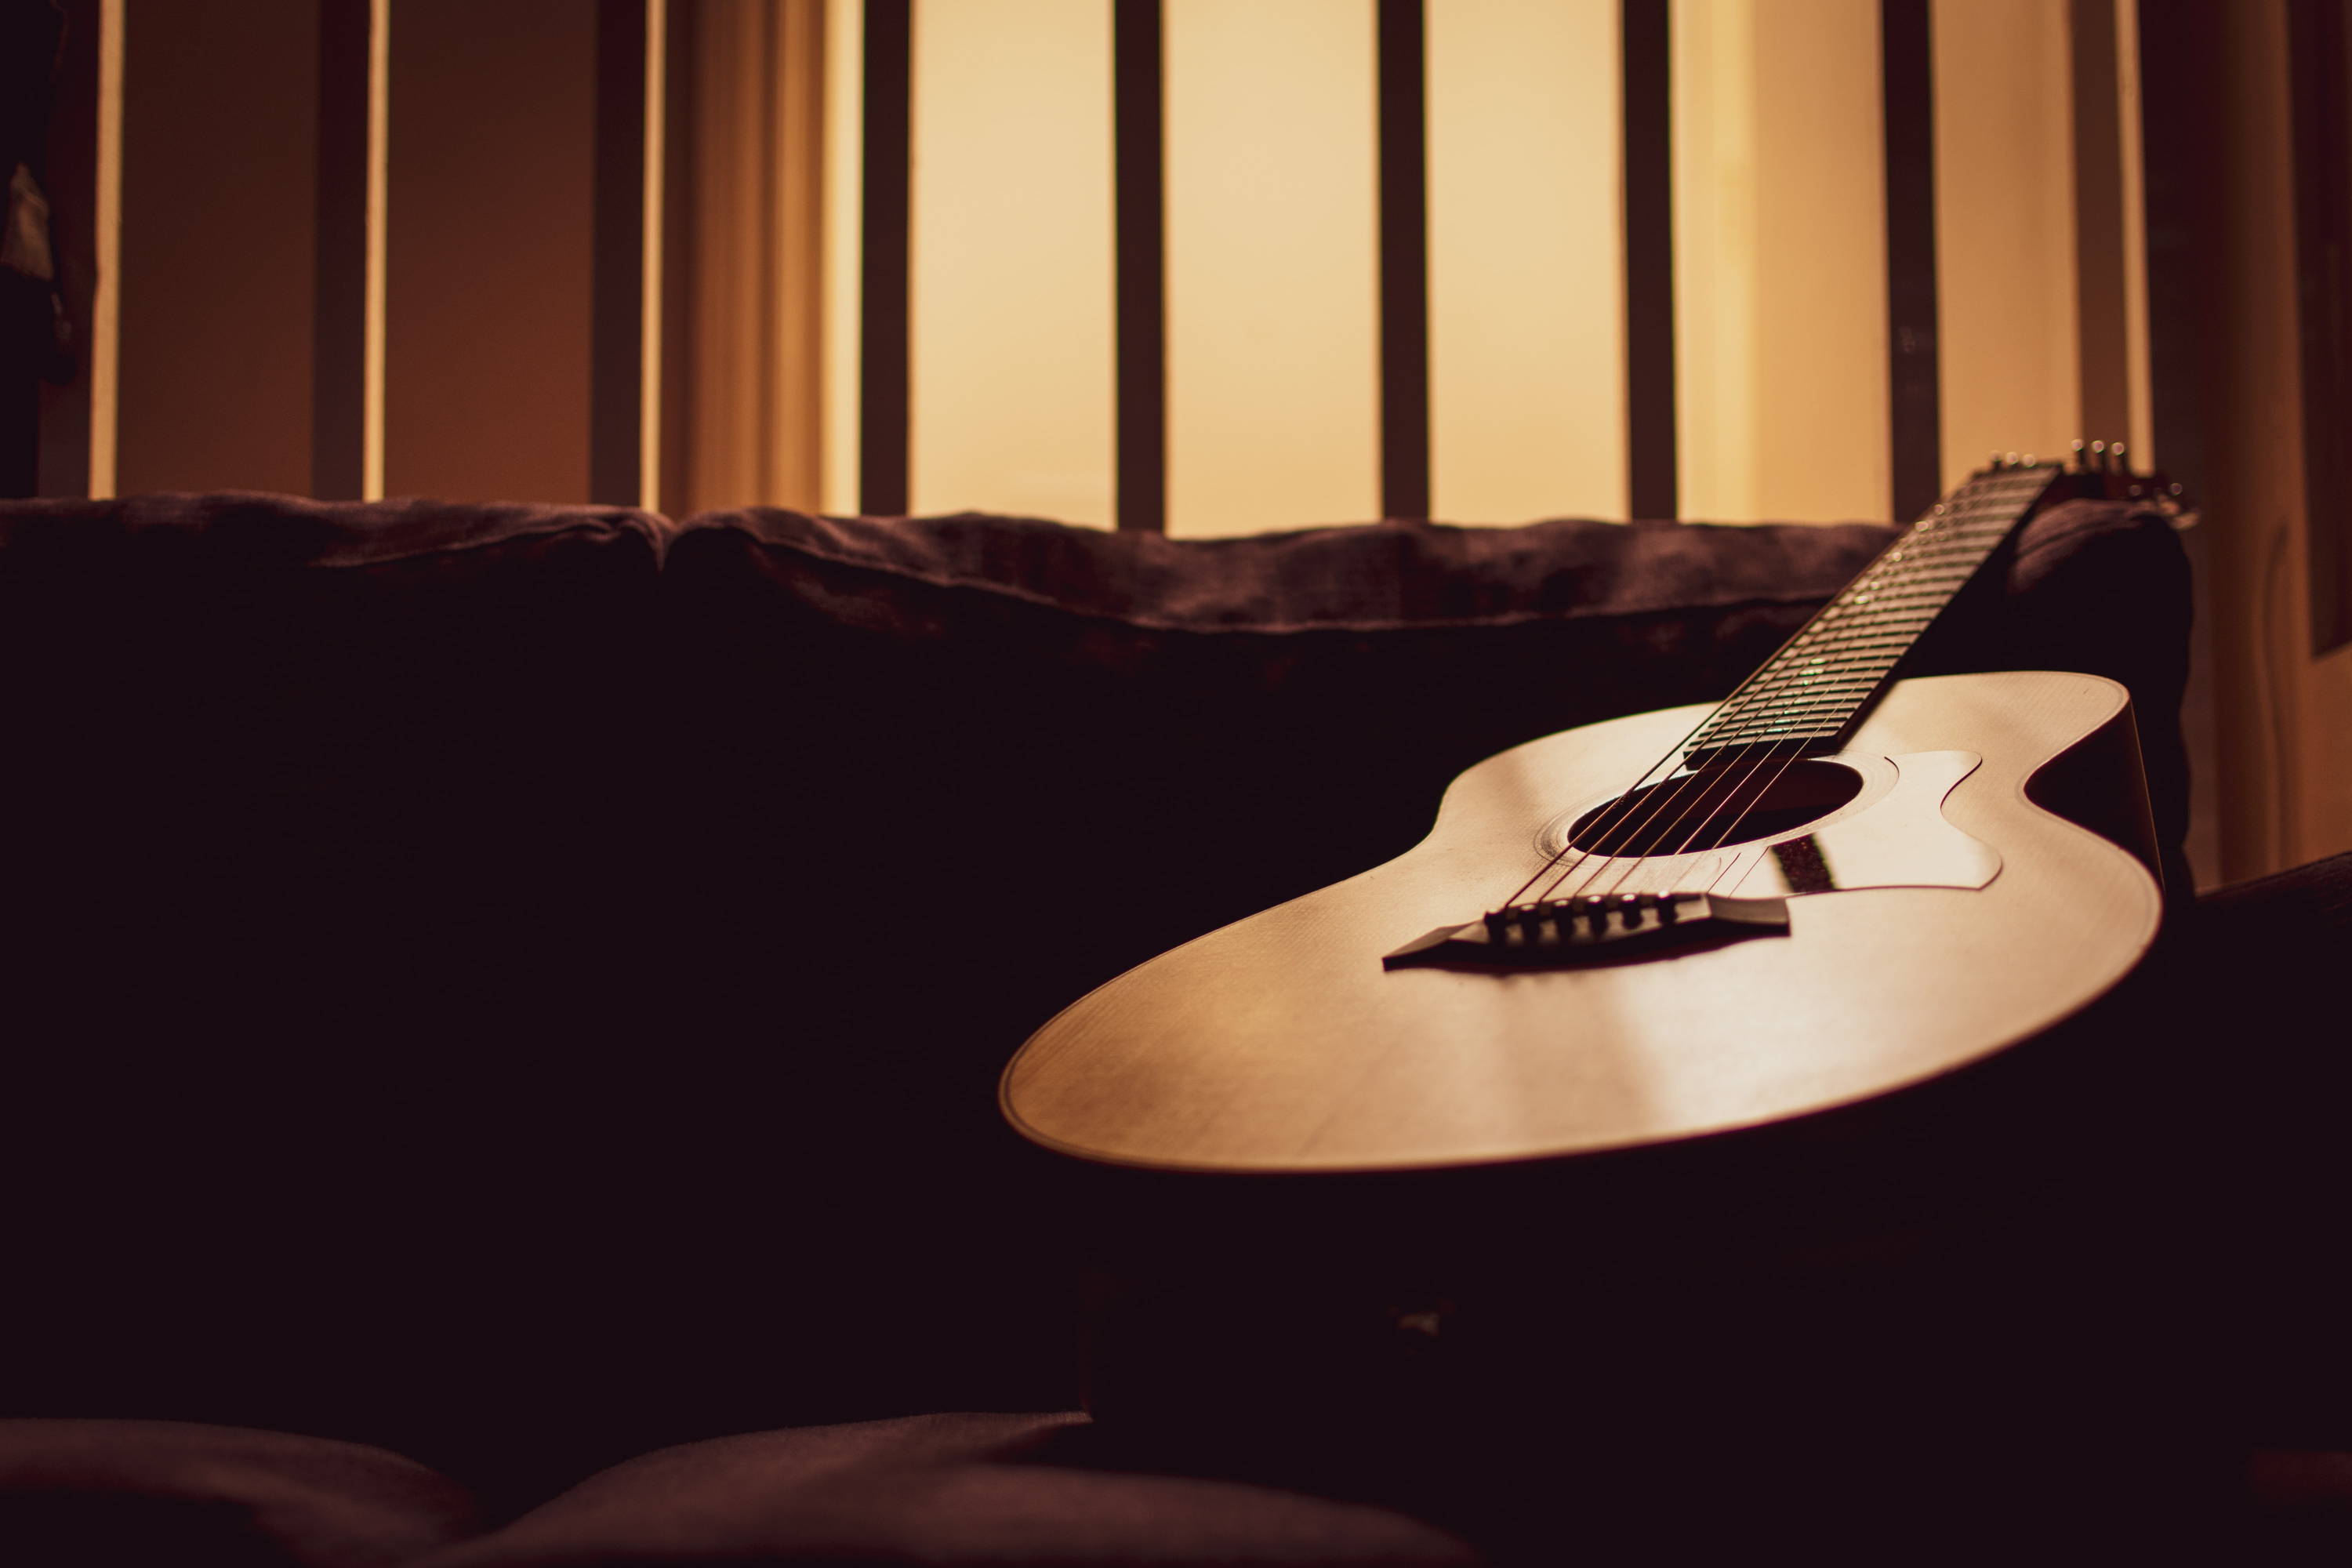 How To Choose A Good Acoustic Guitar